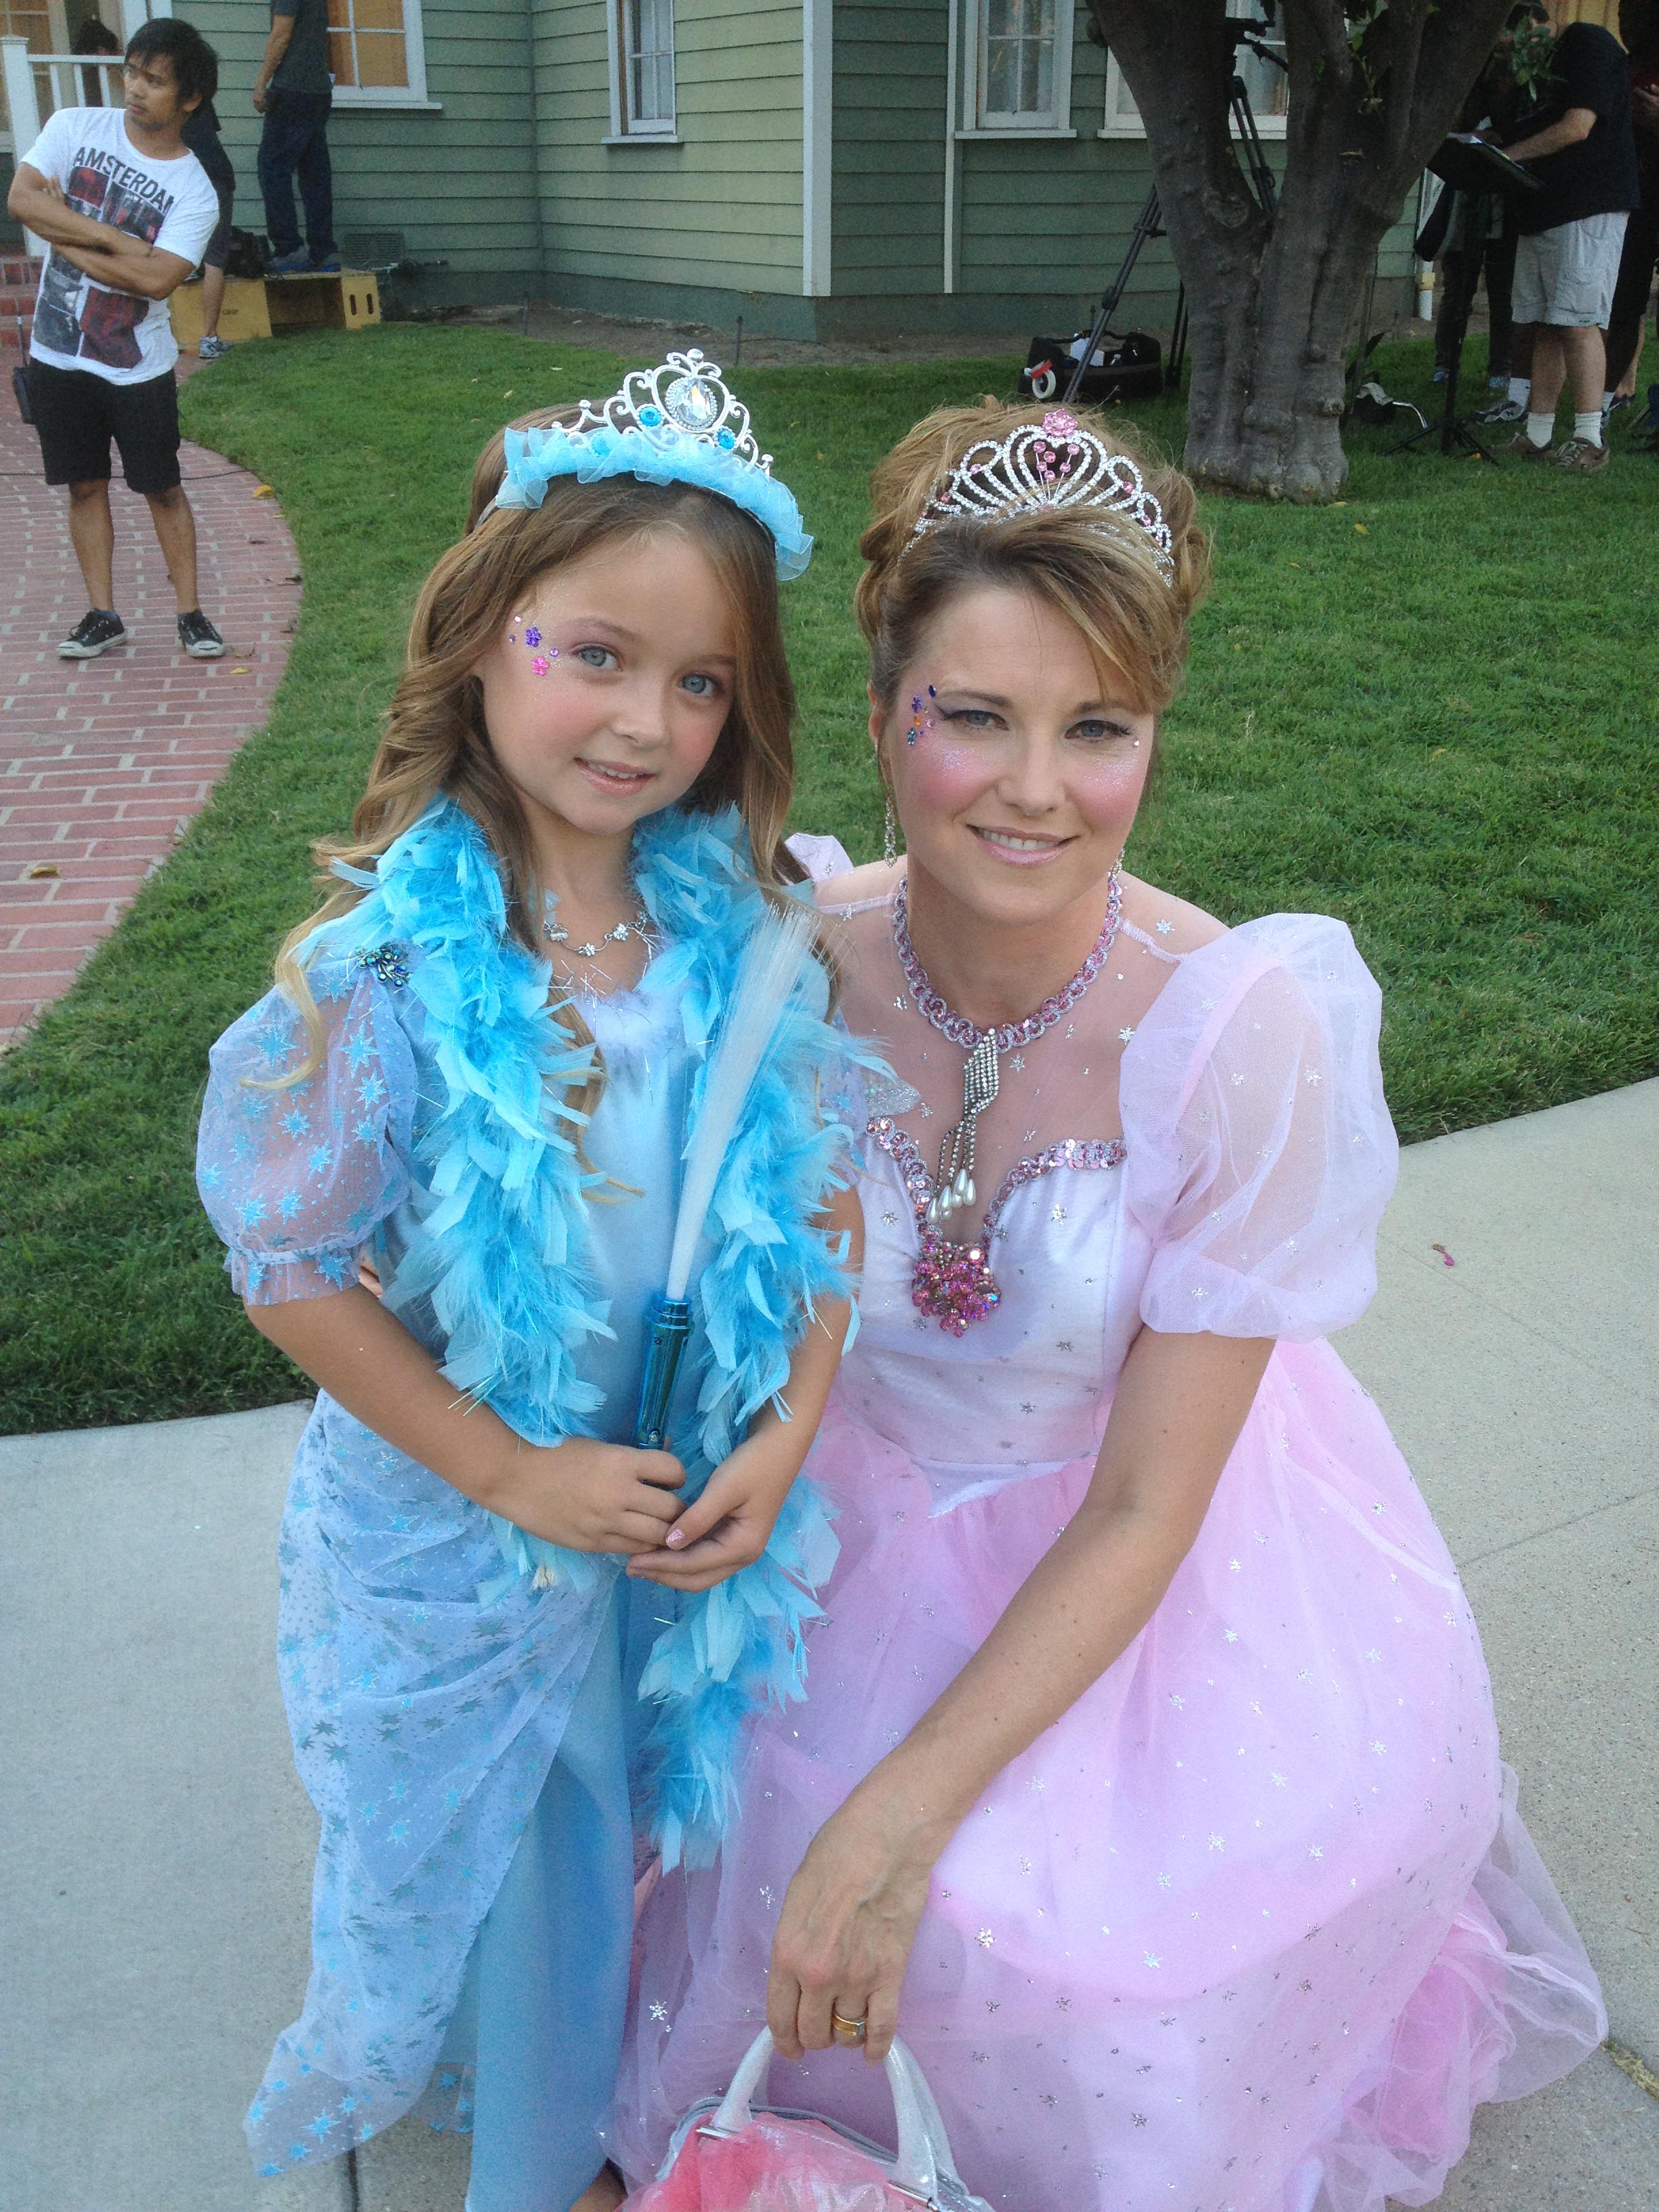 Rylan Lee & Lucy Lawless on set of Parks & Recreation